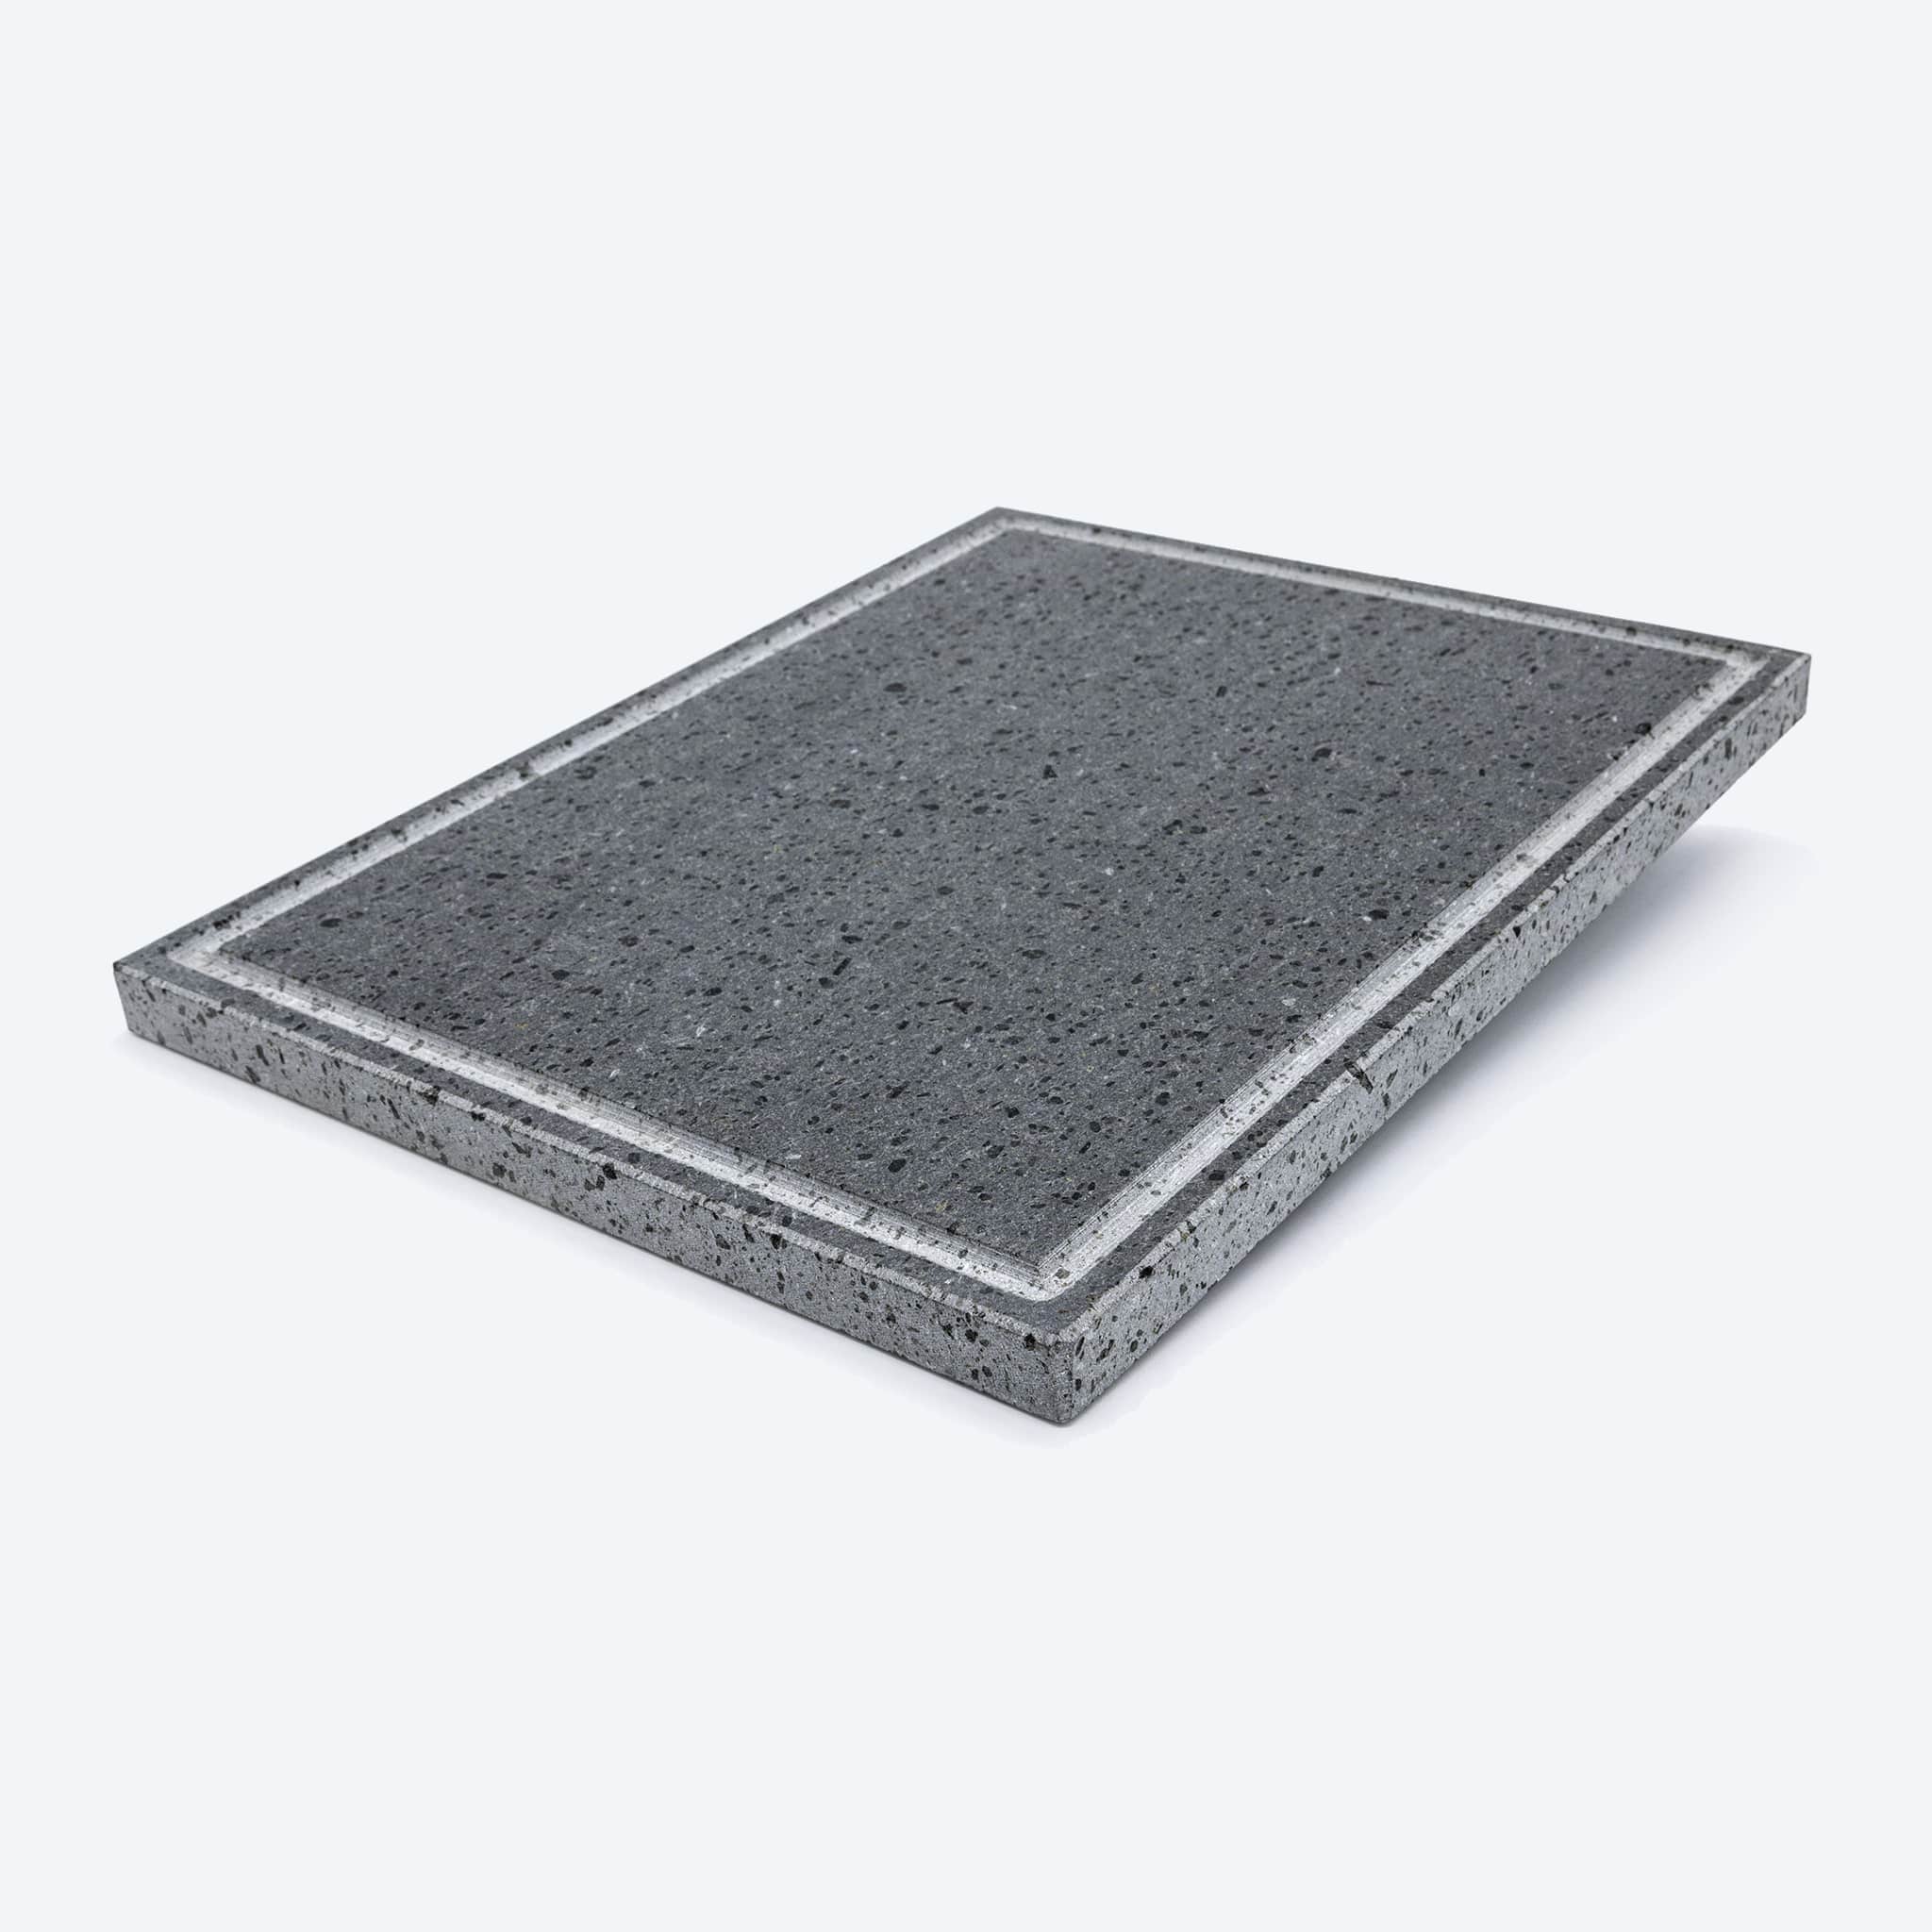 Lava stone refractory plate for barbecue 39X30X2 cm with fat collection groove